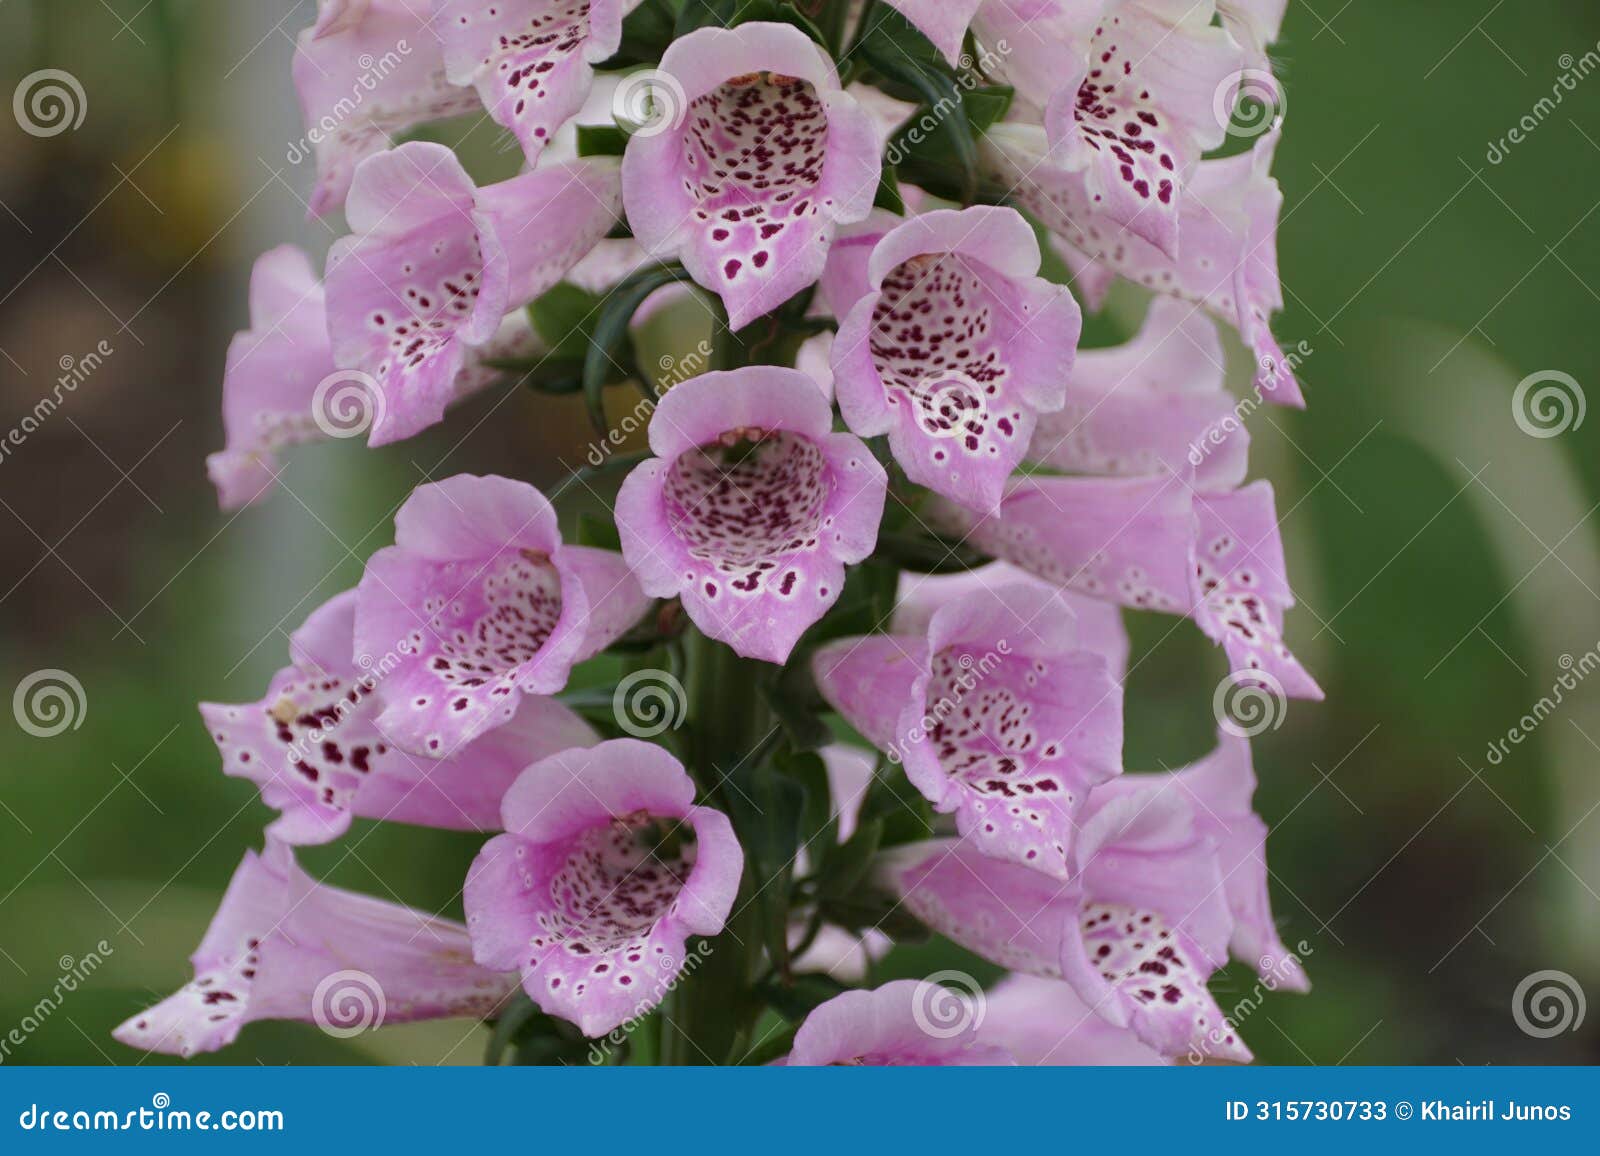 beautiful tiny purple freckles of mixed cultivars foxglove flower